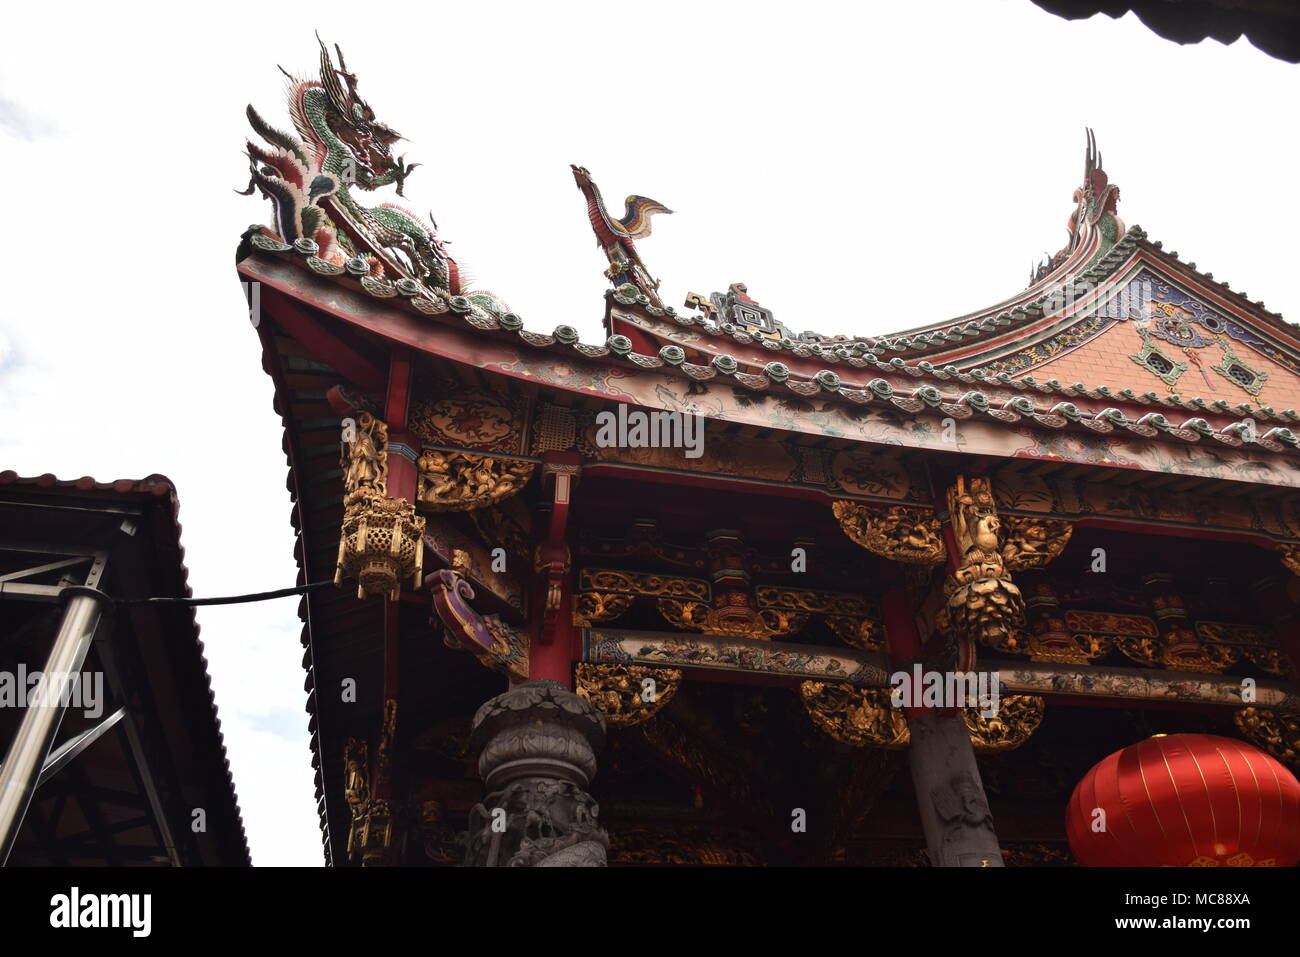 Nice decorations on a roof inside Longshan buddhist temple in Taipei, Taiwan Stock Photo